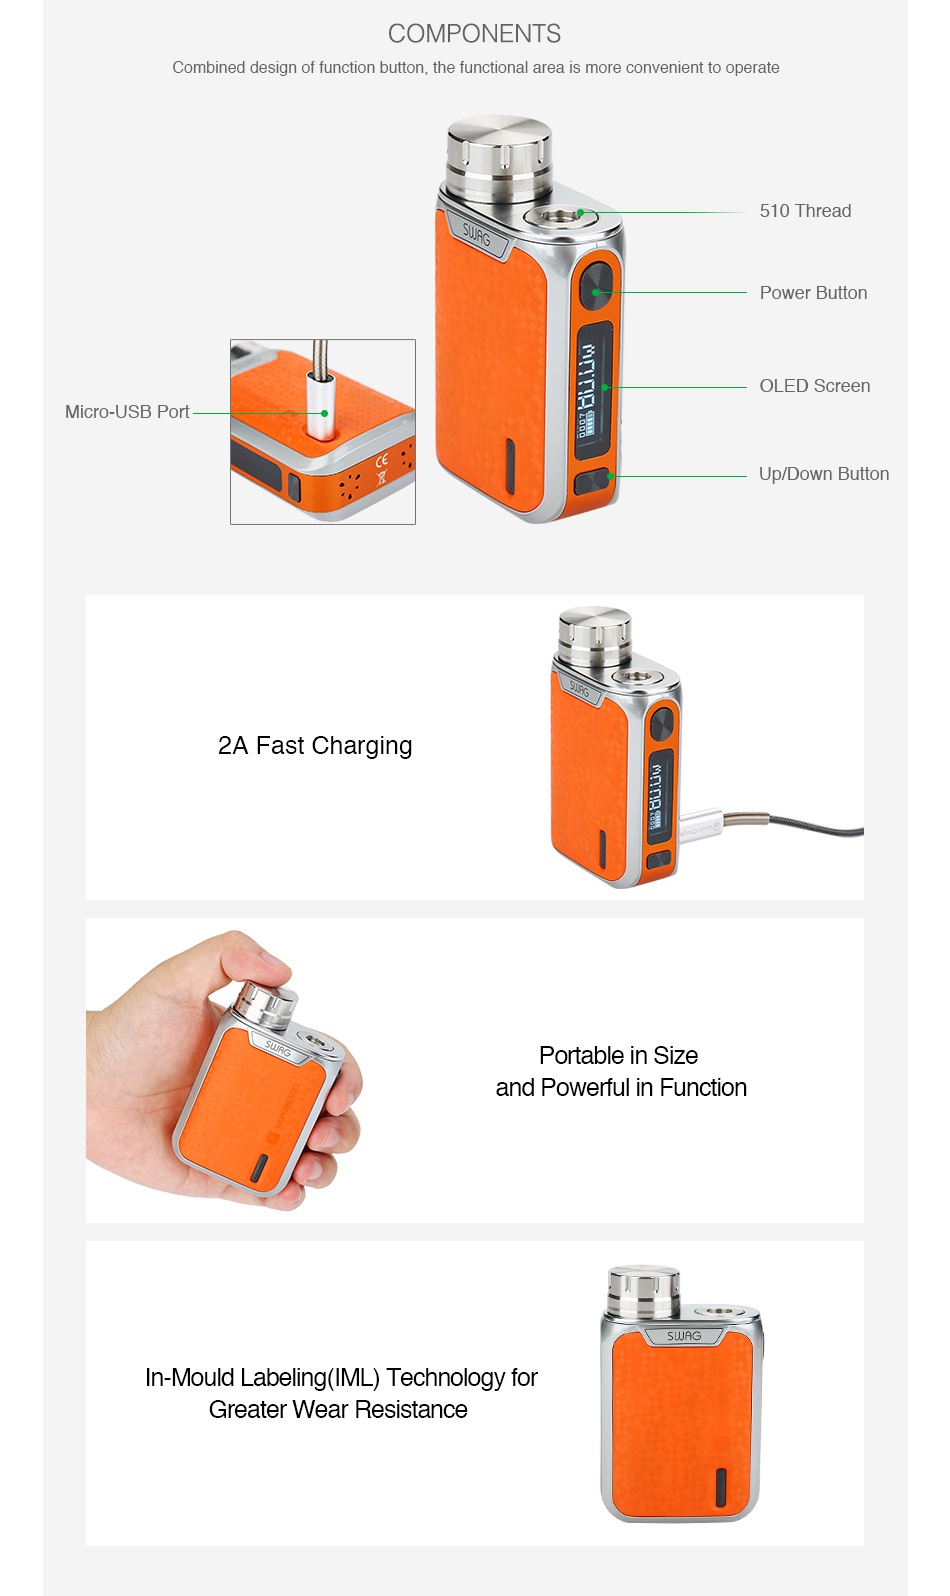 Vaporesso Swag 80W TC Box MOD COMPONENTS Combined desian of function button the functional area is more convenie perate 510 Thread Power Button OLED Screen Micro USB Port Down button 2A Fast Charging Portable in size and powerful in function LAG Mould Labeling IML Technology for Greater Wear resistance